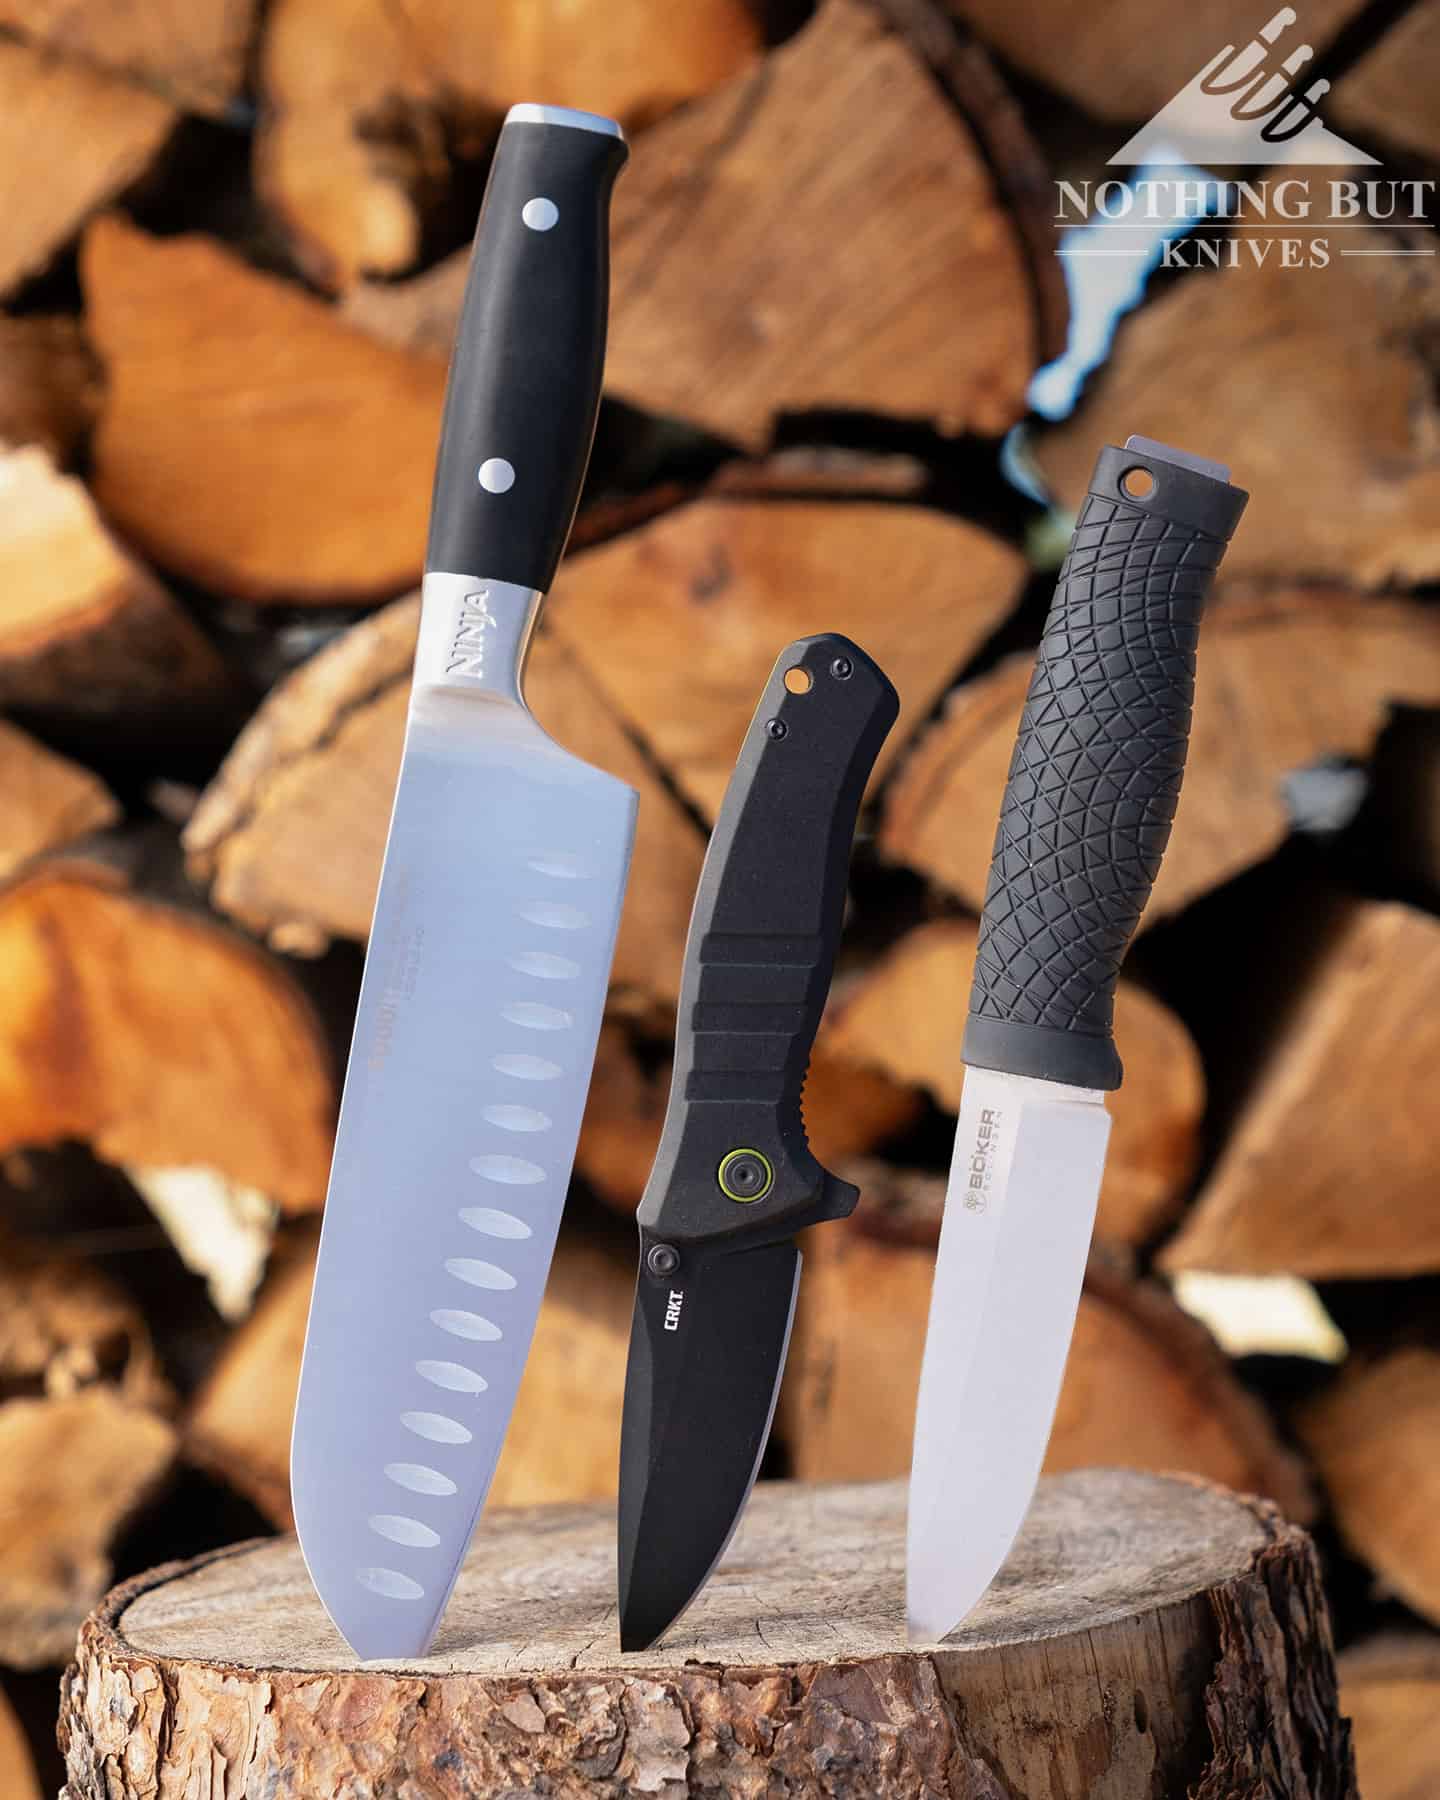 Fixed blade knives designed for bushcraft tasks are the best choice.